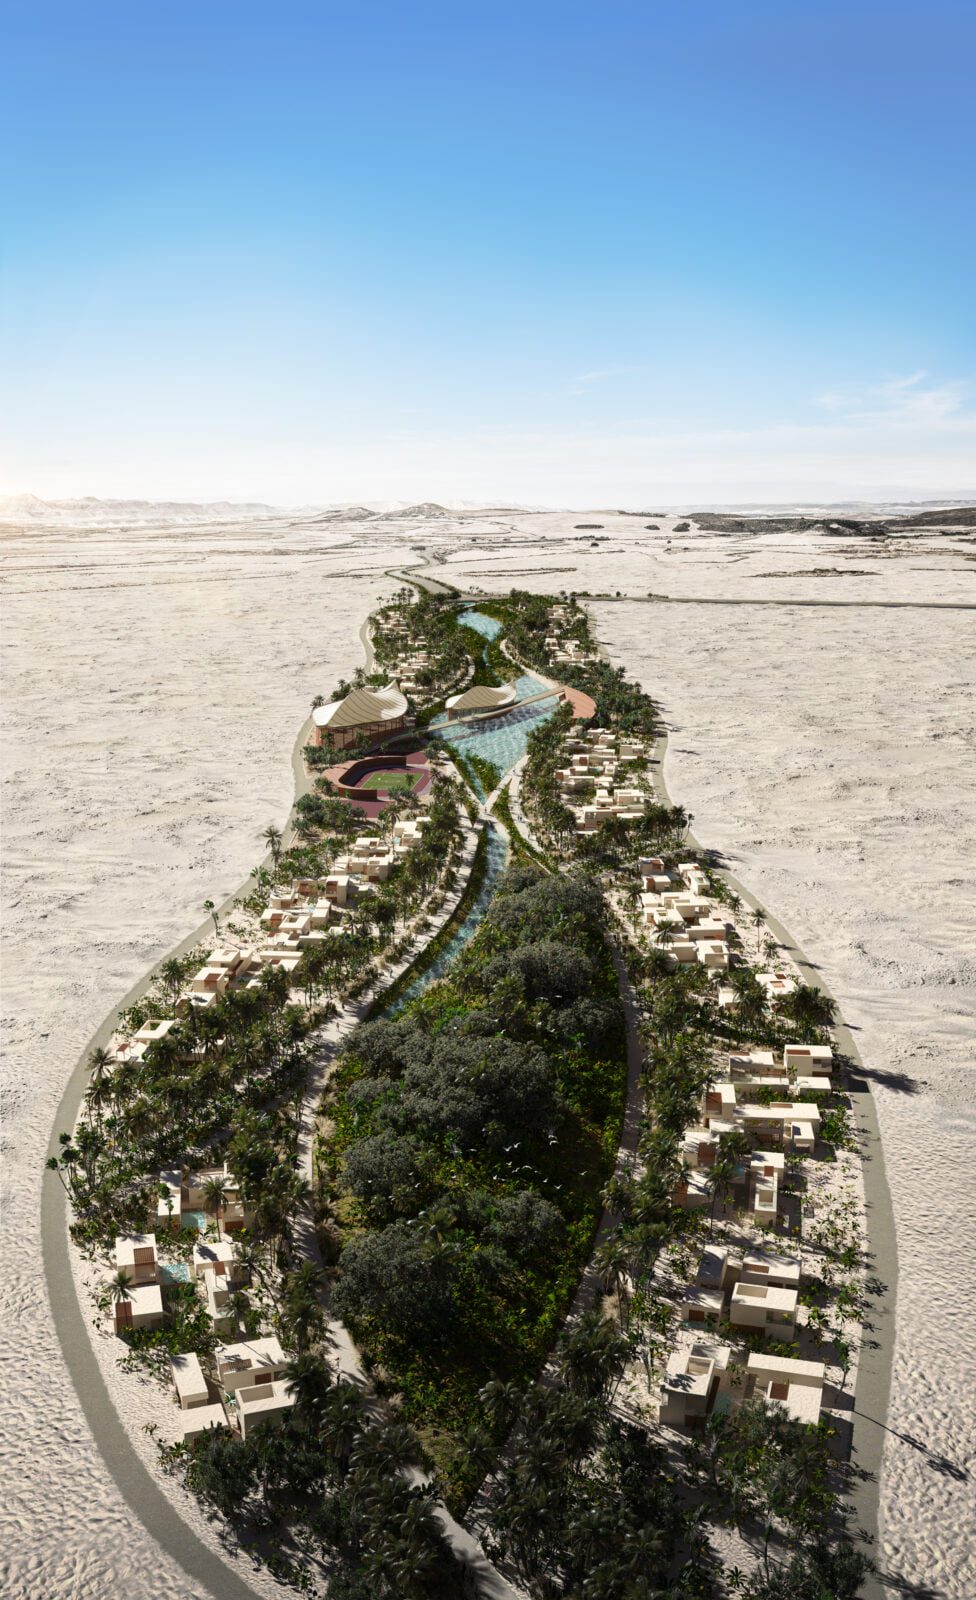 Aerial overview of the doha housing masterplan with central green spine and community facilities